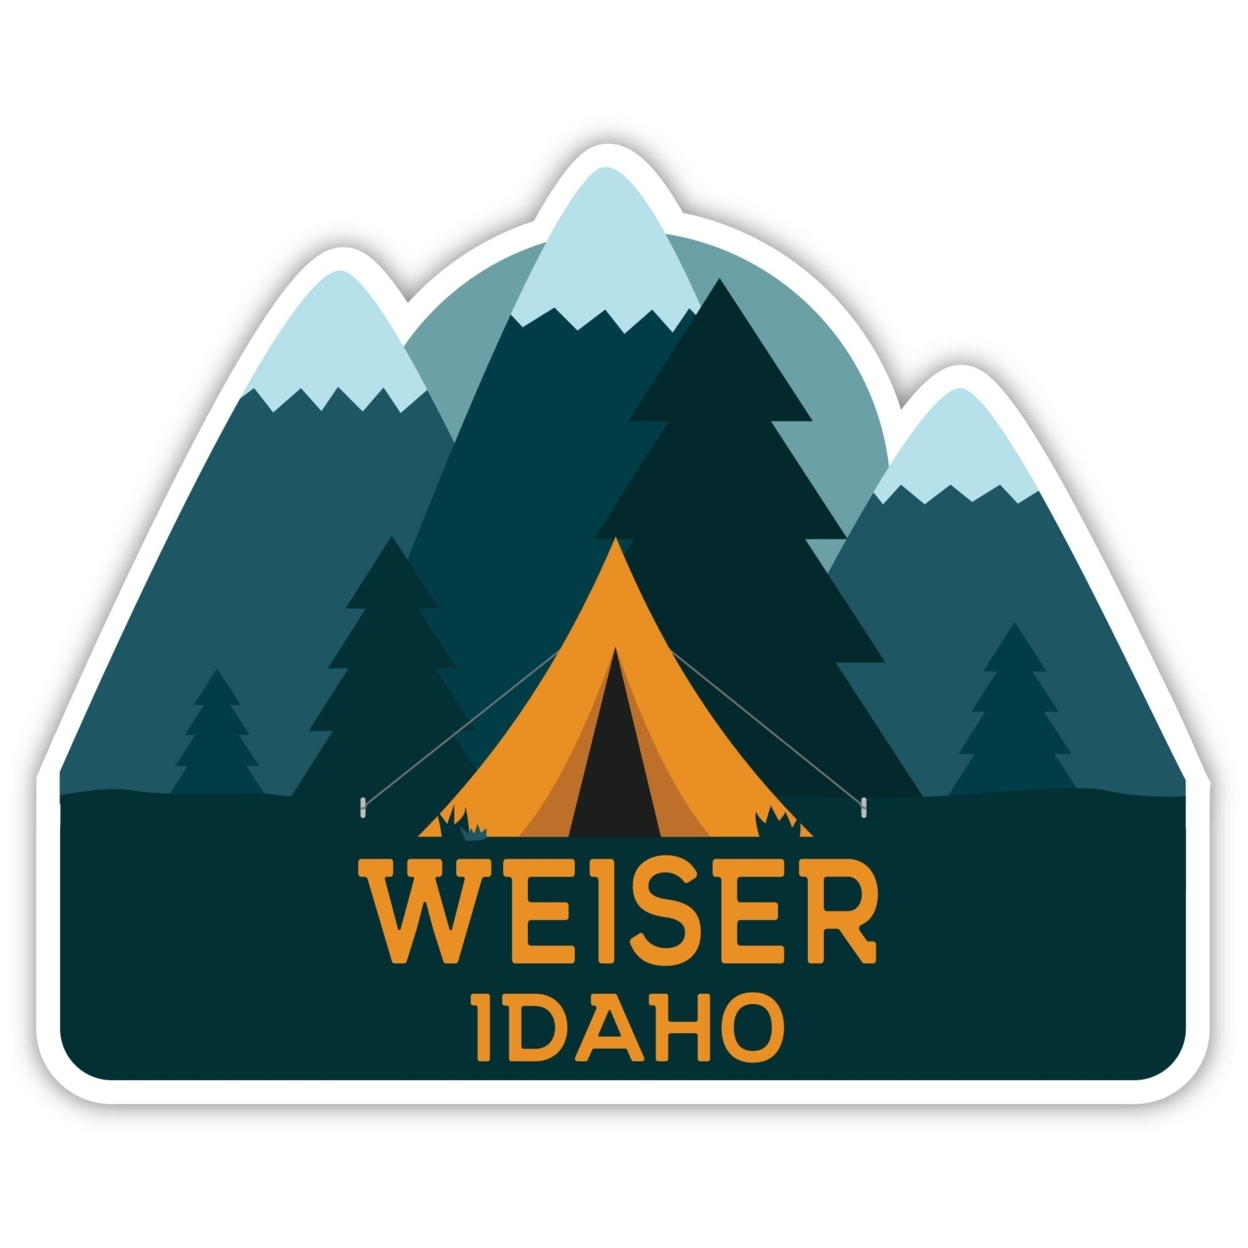 Weiser Idaho Souvenir Decorative Stickers (Choose Theme And Size) - Single Unit, 4-Inch, Camp Life